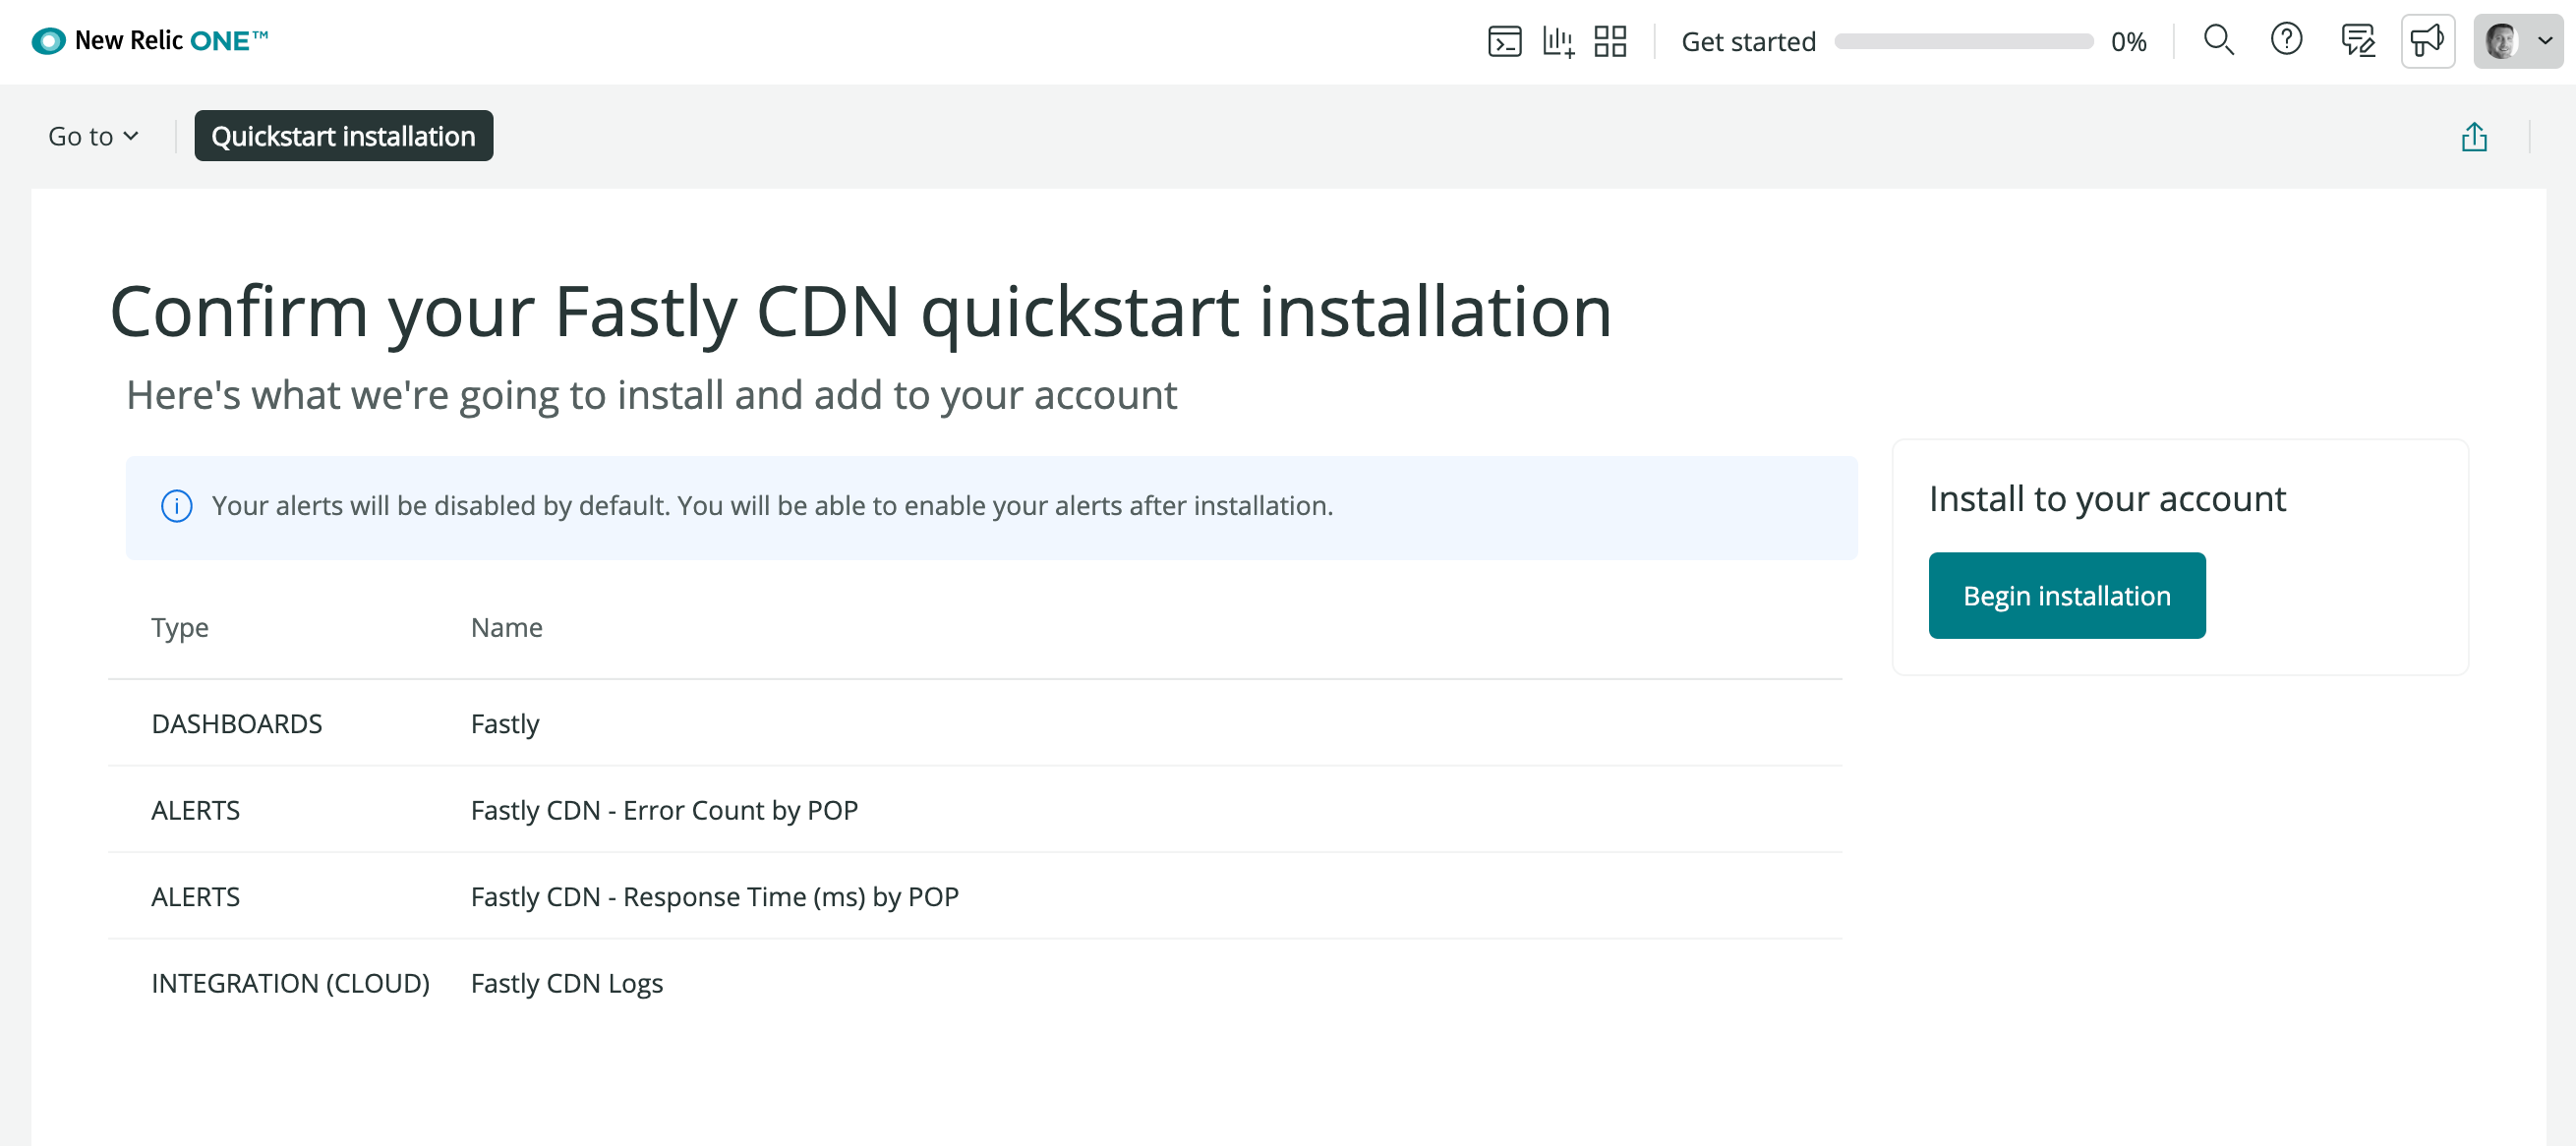 New Relic Fastly Dashboard Install Step 1